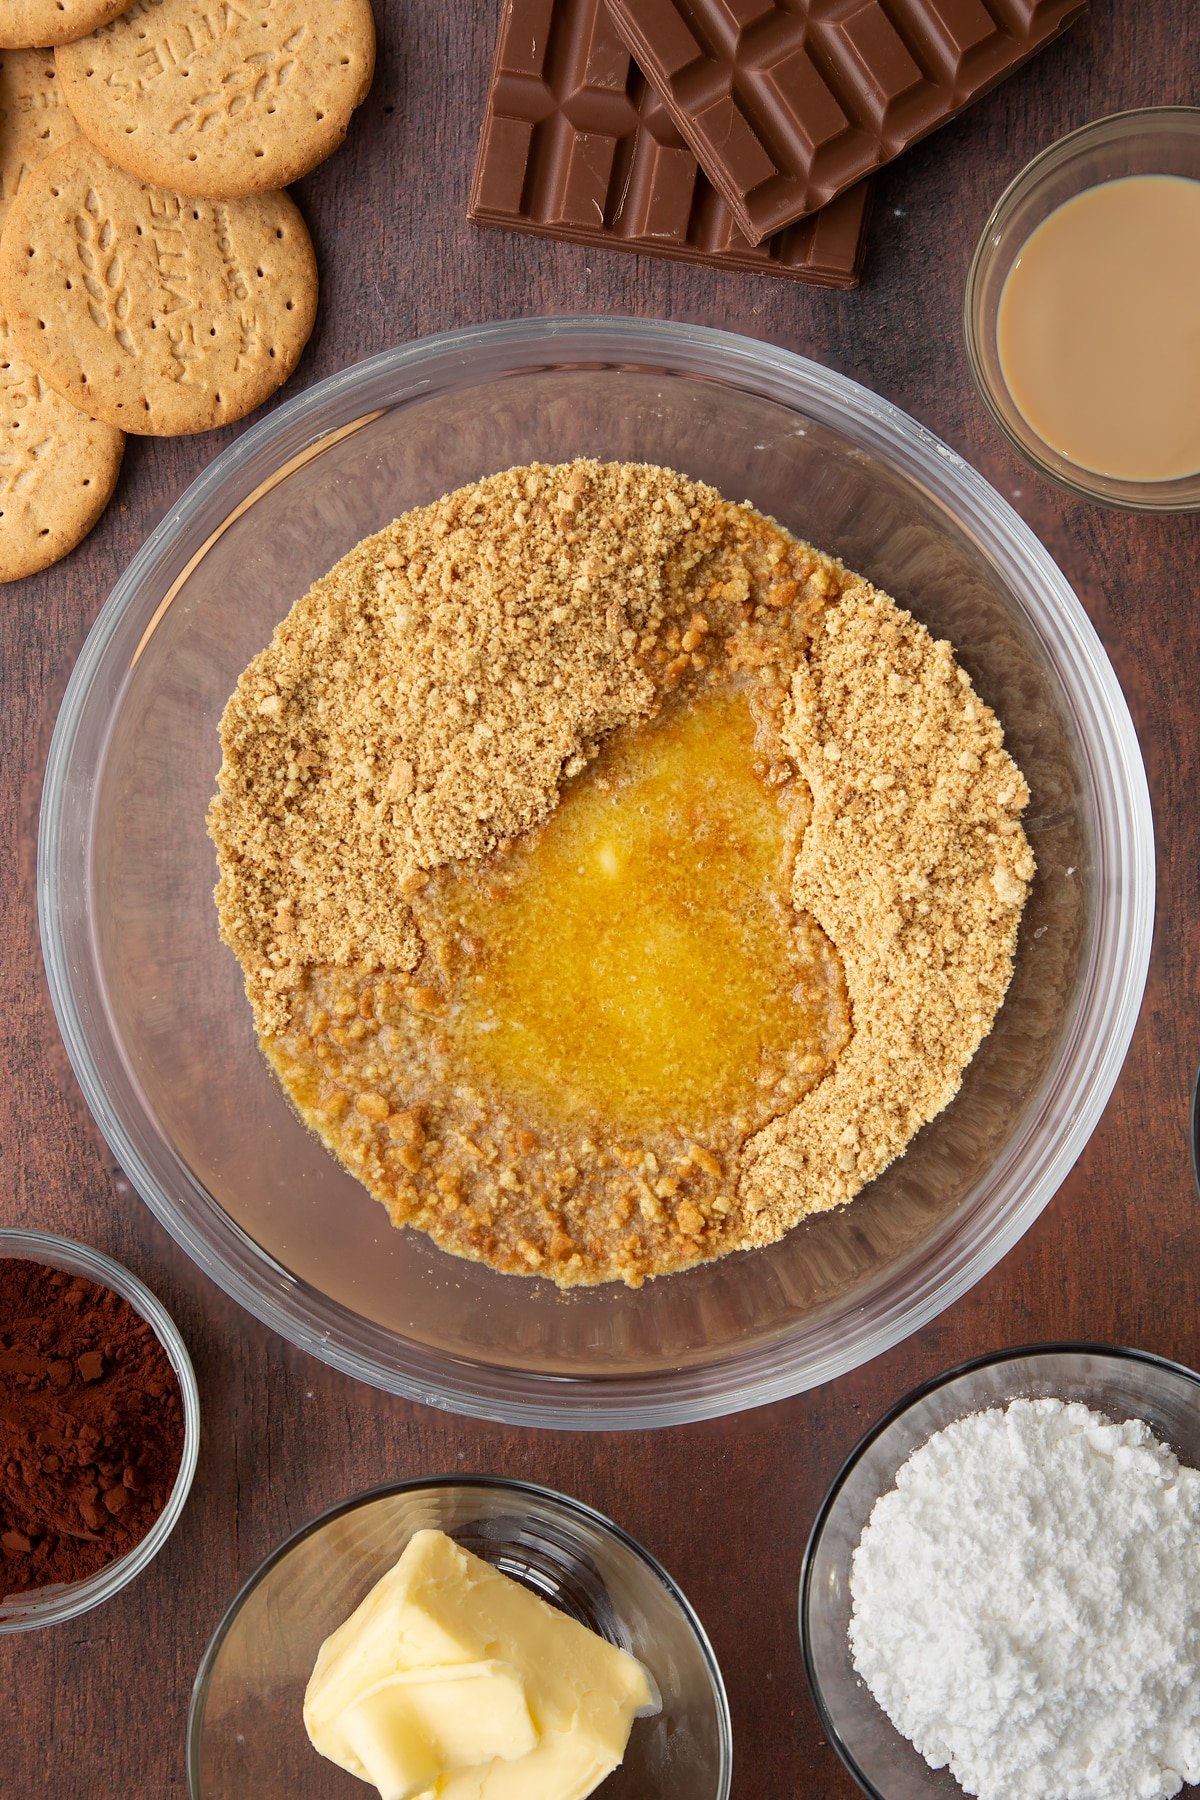 Digestive biscuit crumbs and melted butter in a glass bowl. Ingredients to make Baileys cheesecake surround the bowl.